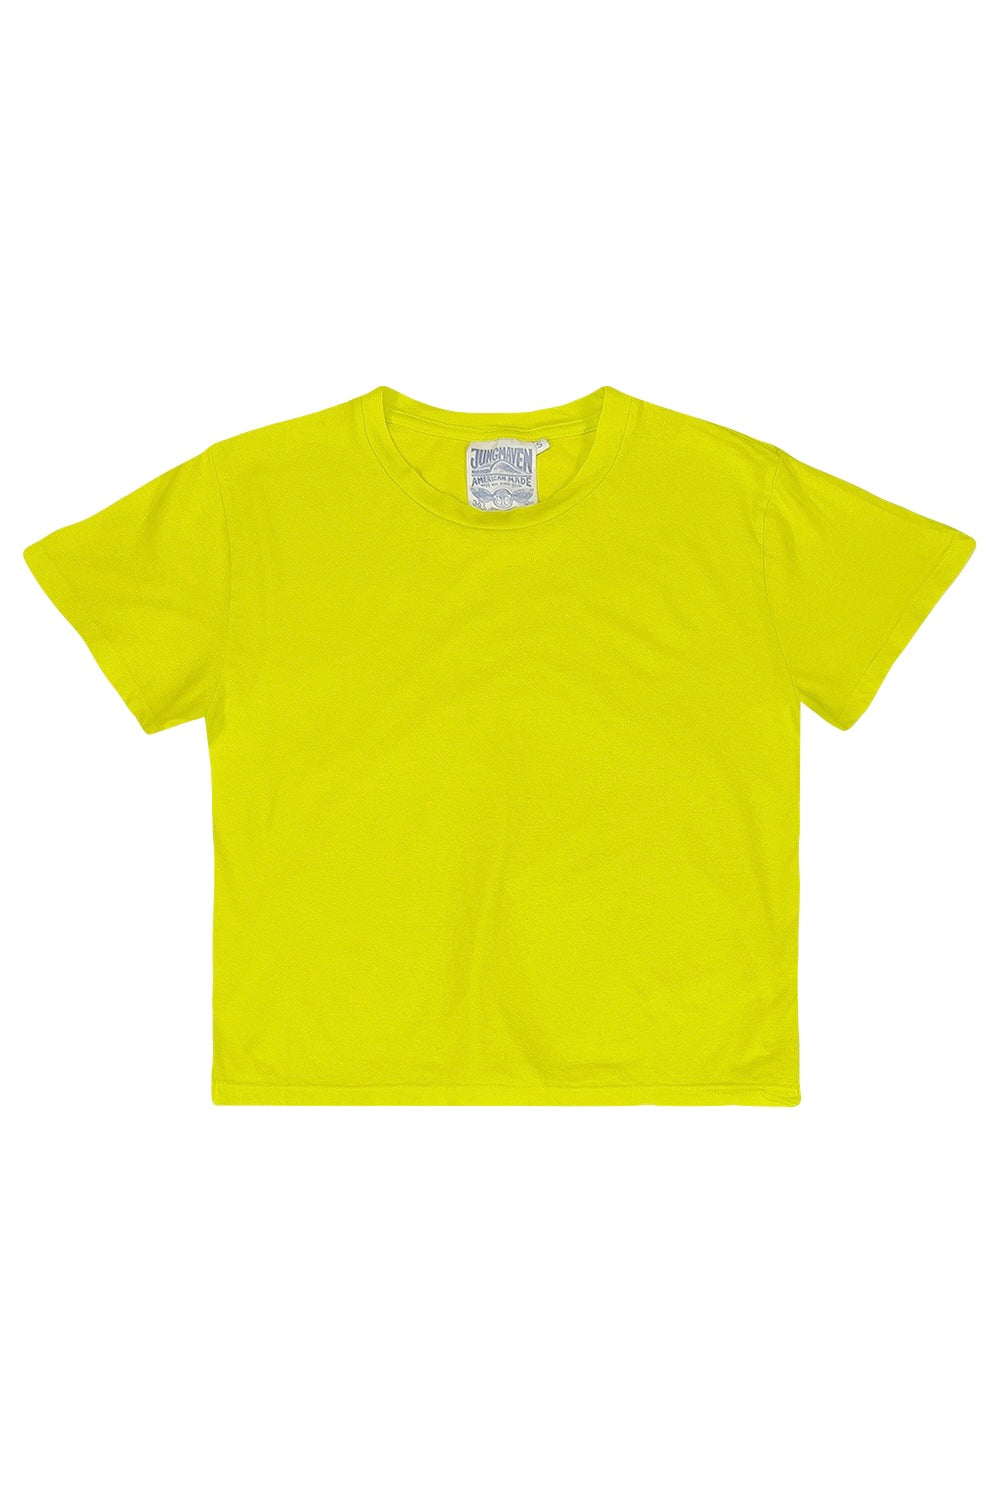 Cropped Ojai Tee | Jungmaven Hemp Clothing & Accessories / Color: Limelight